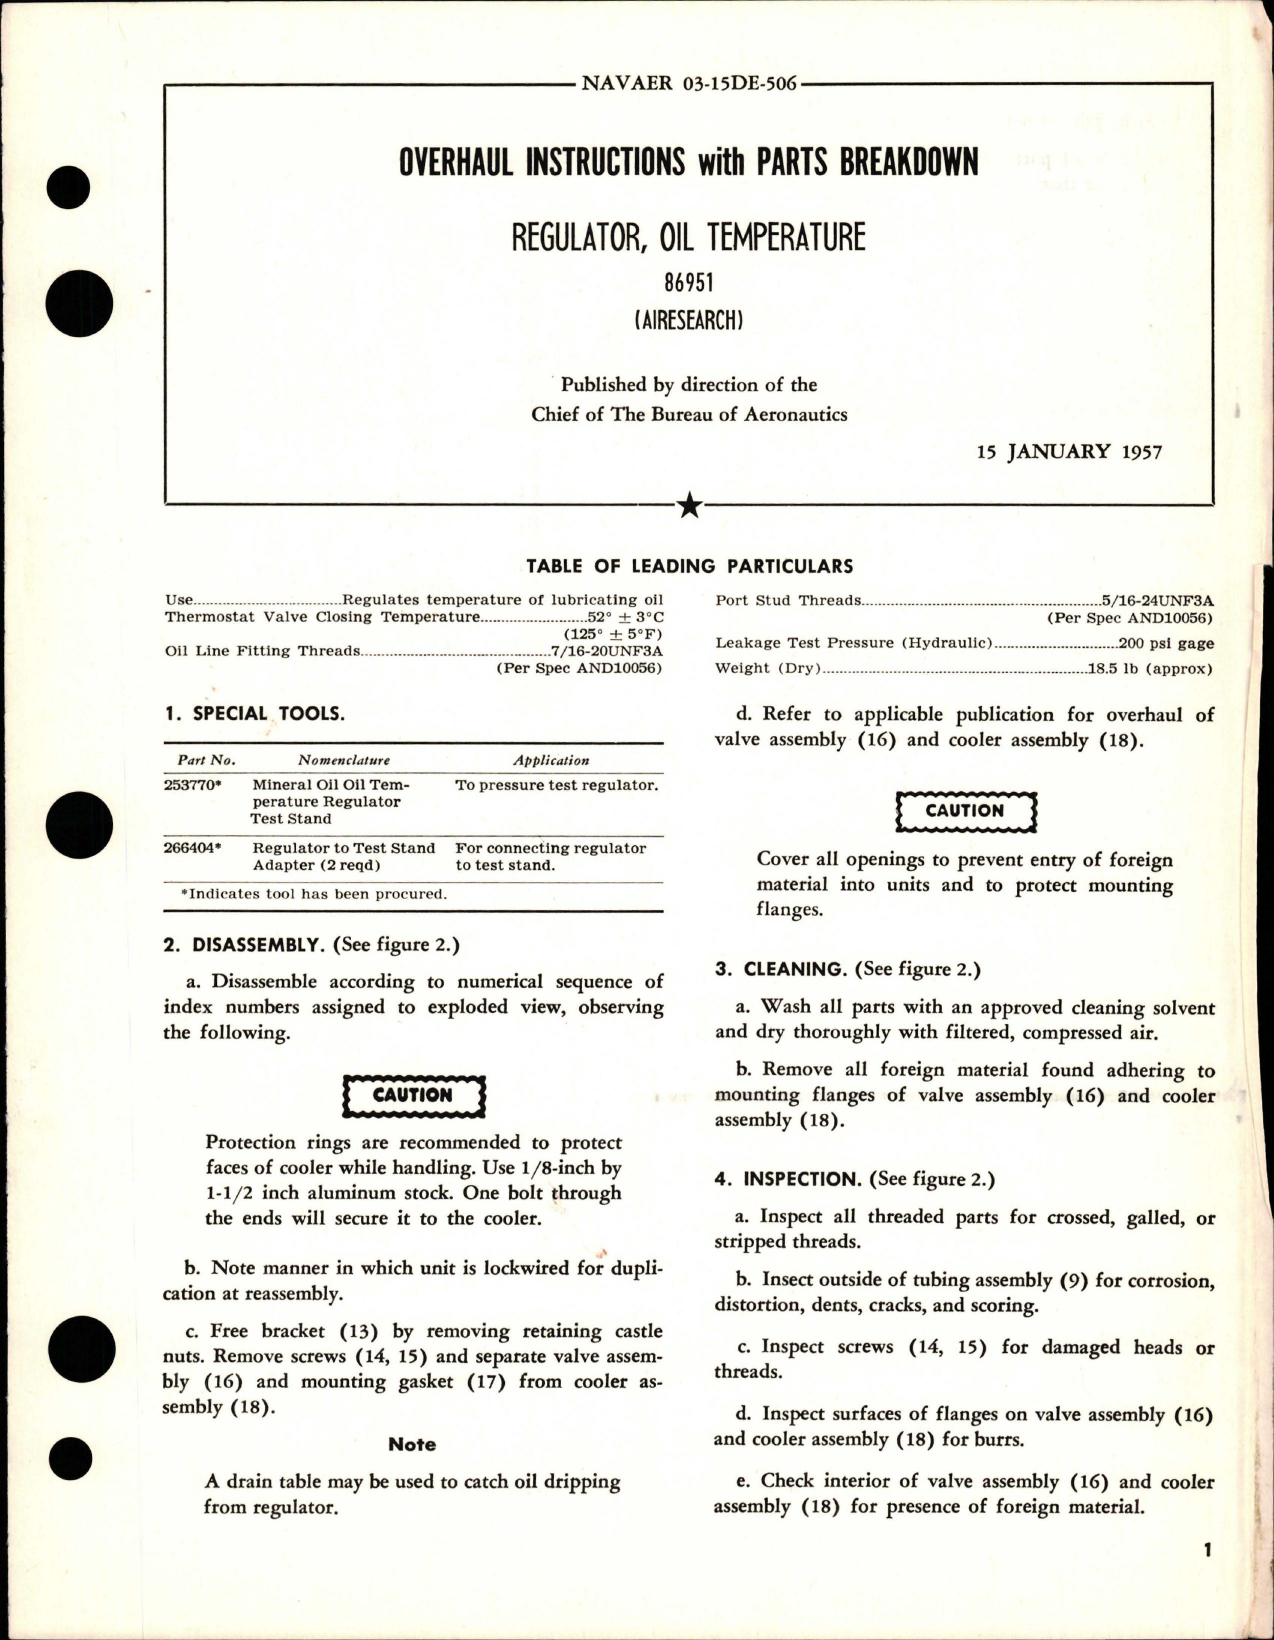 Sample page 1 from AirCorps Library document: Overhaul Instructions with Parts Breakdown for Oil Temperature Regulator - 86951